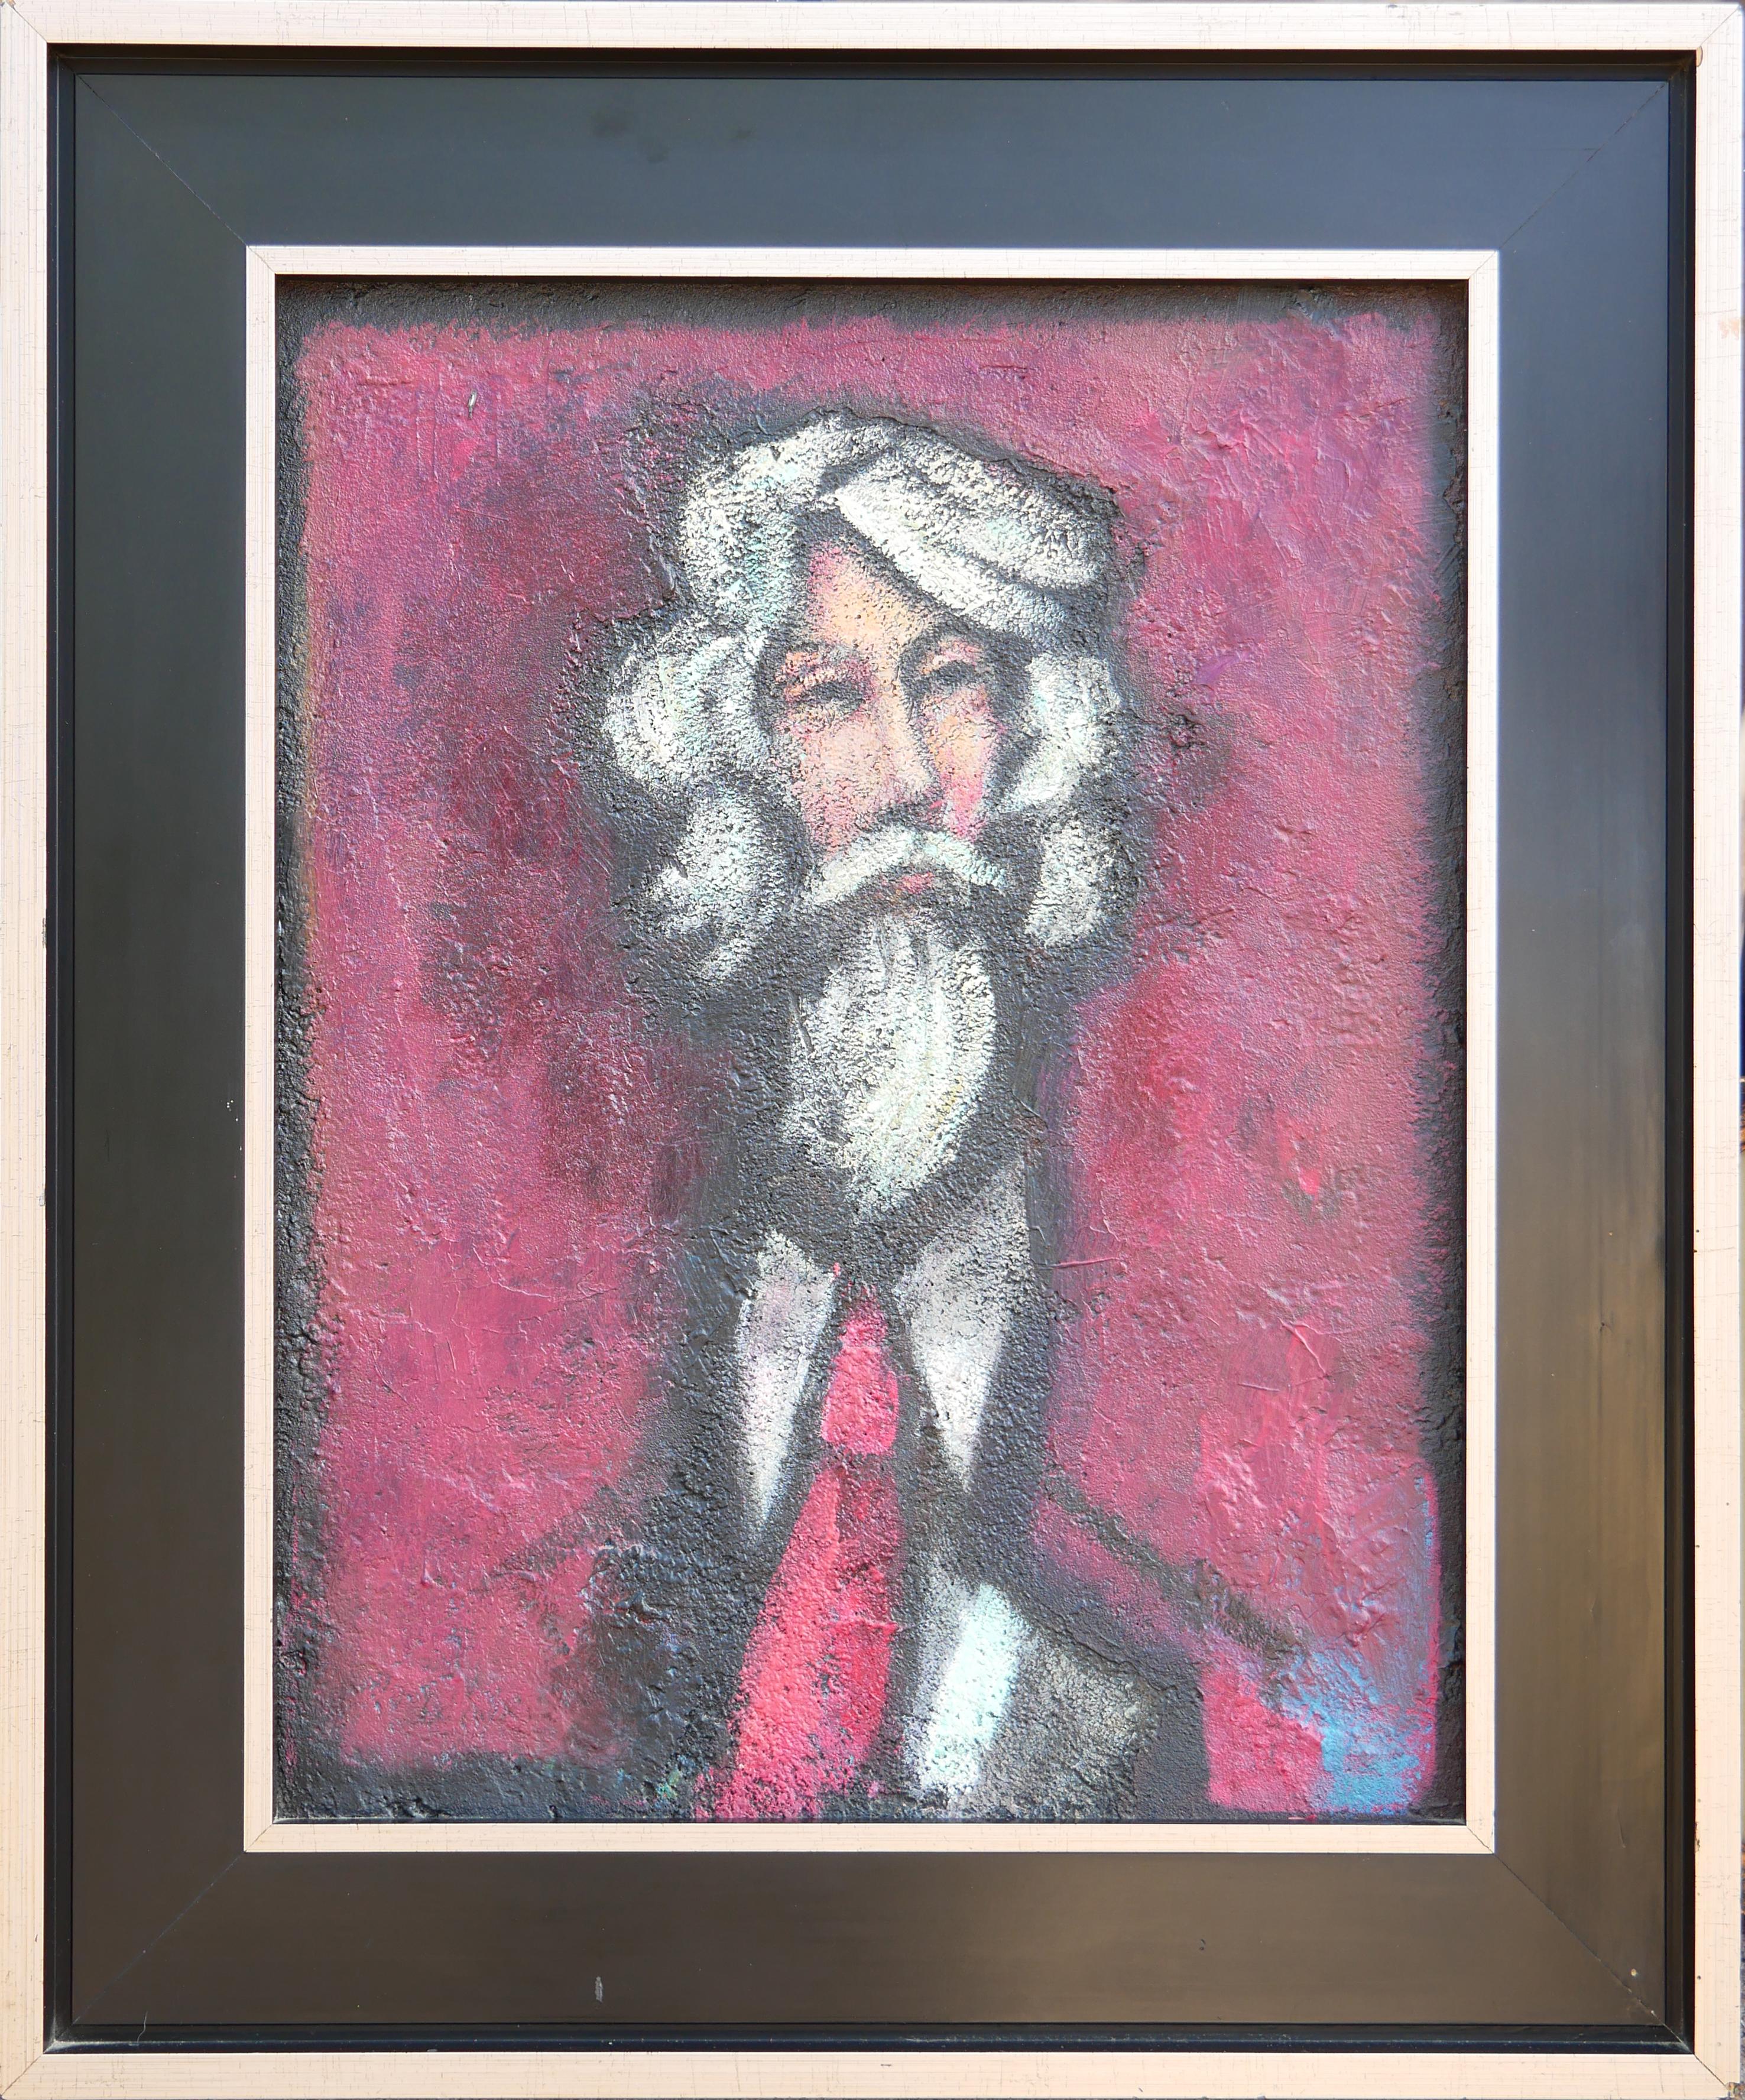 David Adickes Figurative Painting - "White Haired Bearded Man, Red" Modern Abstract Figurative Portrait Painting